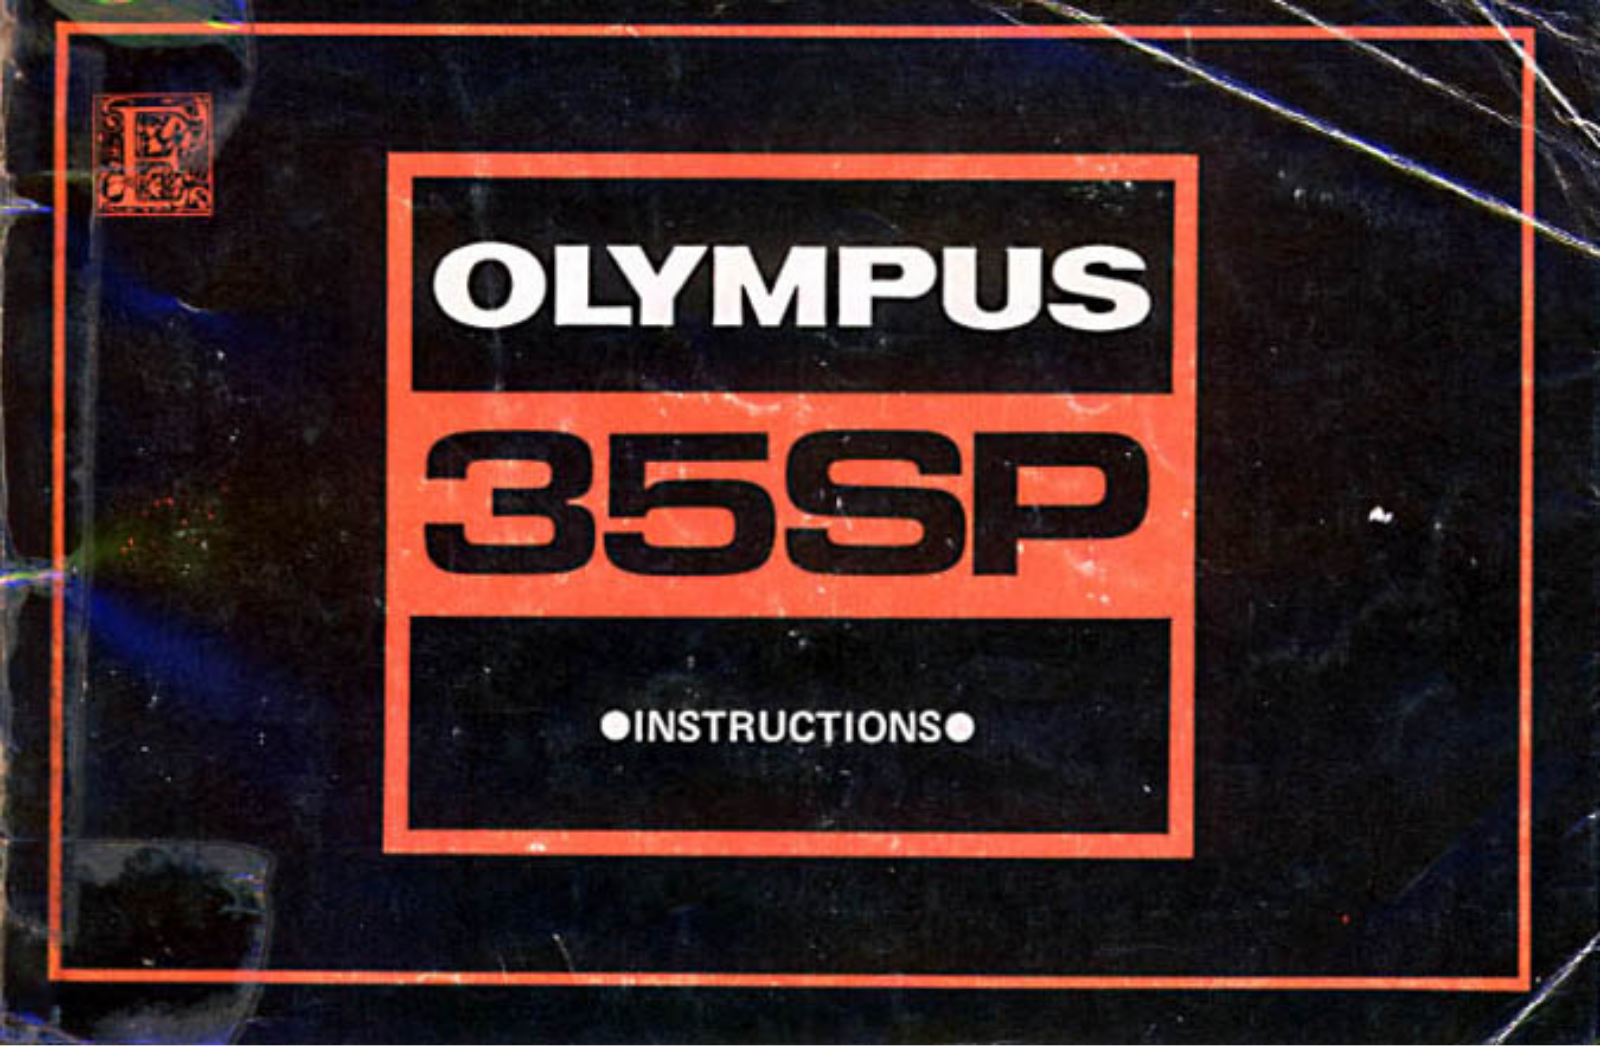 Olympus 35-SP Operating Instructions